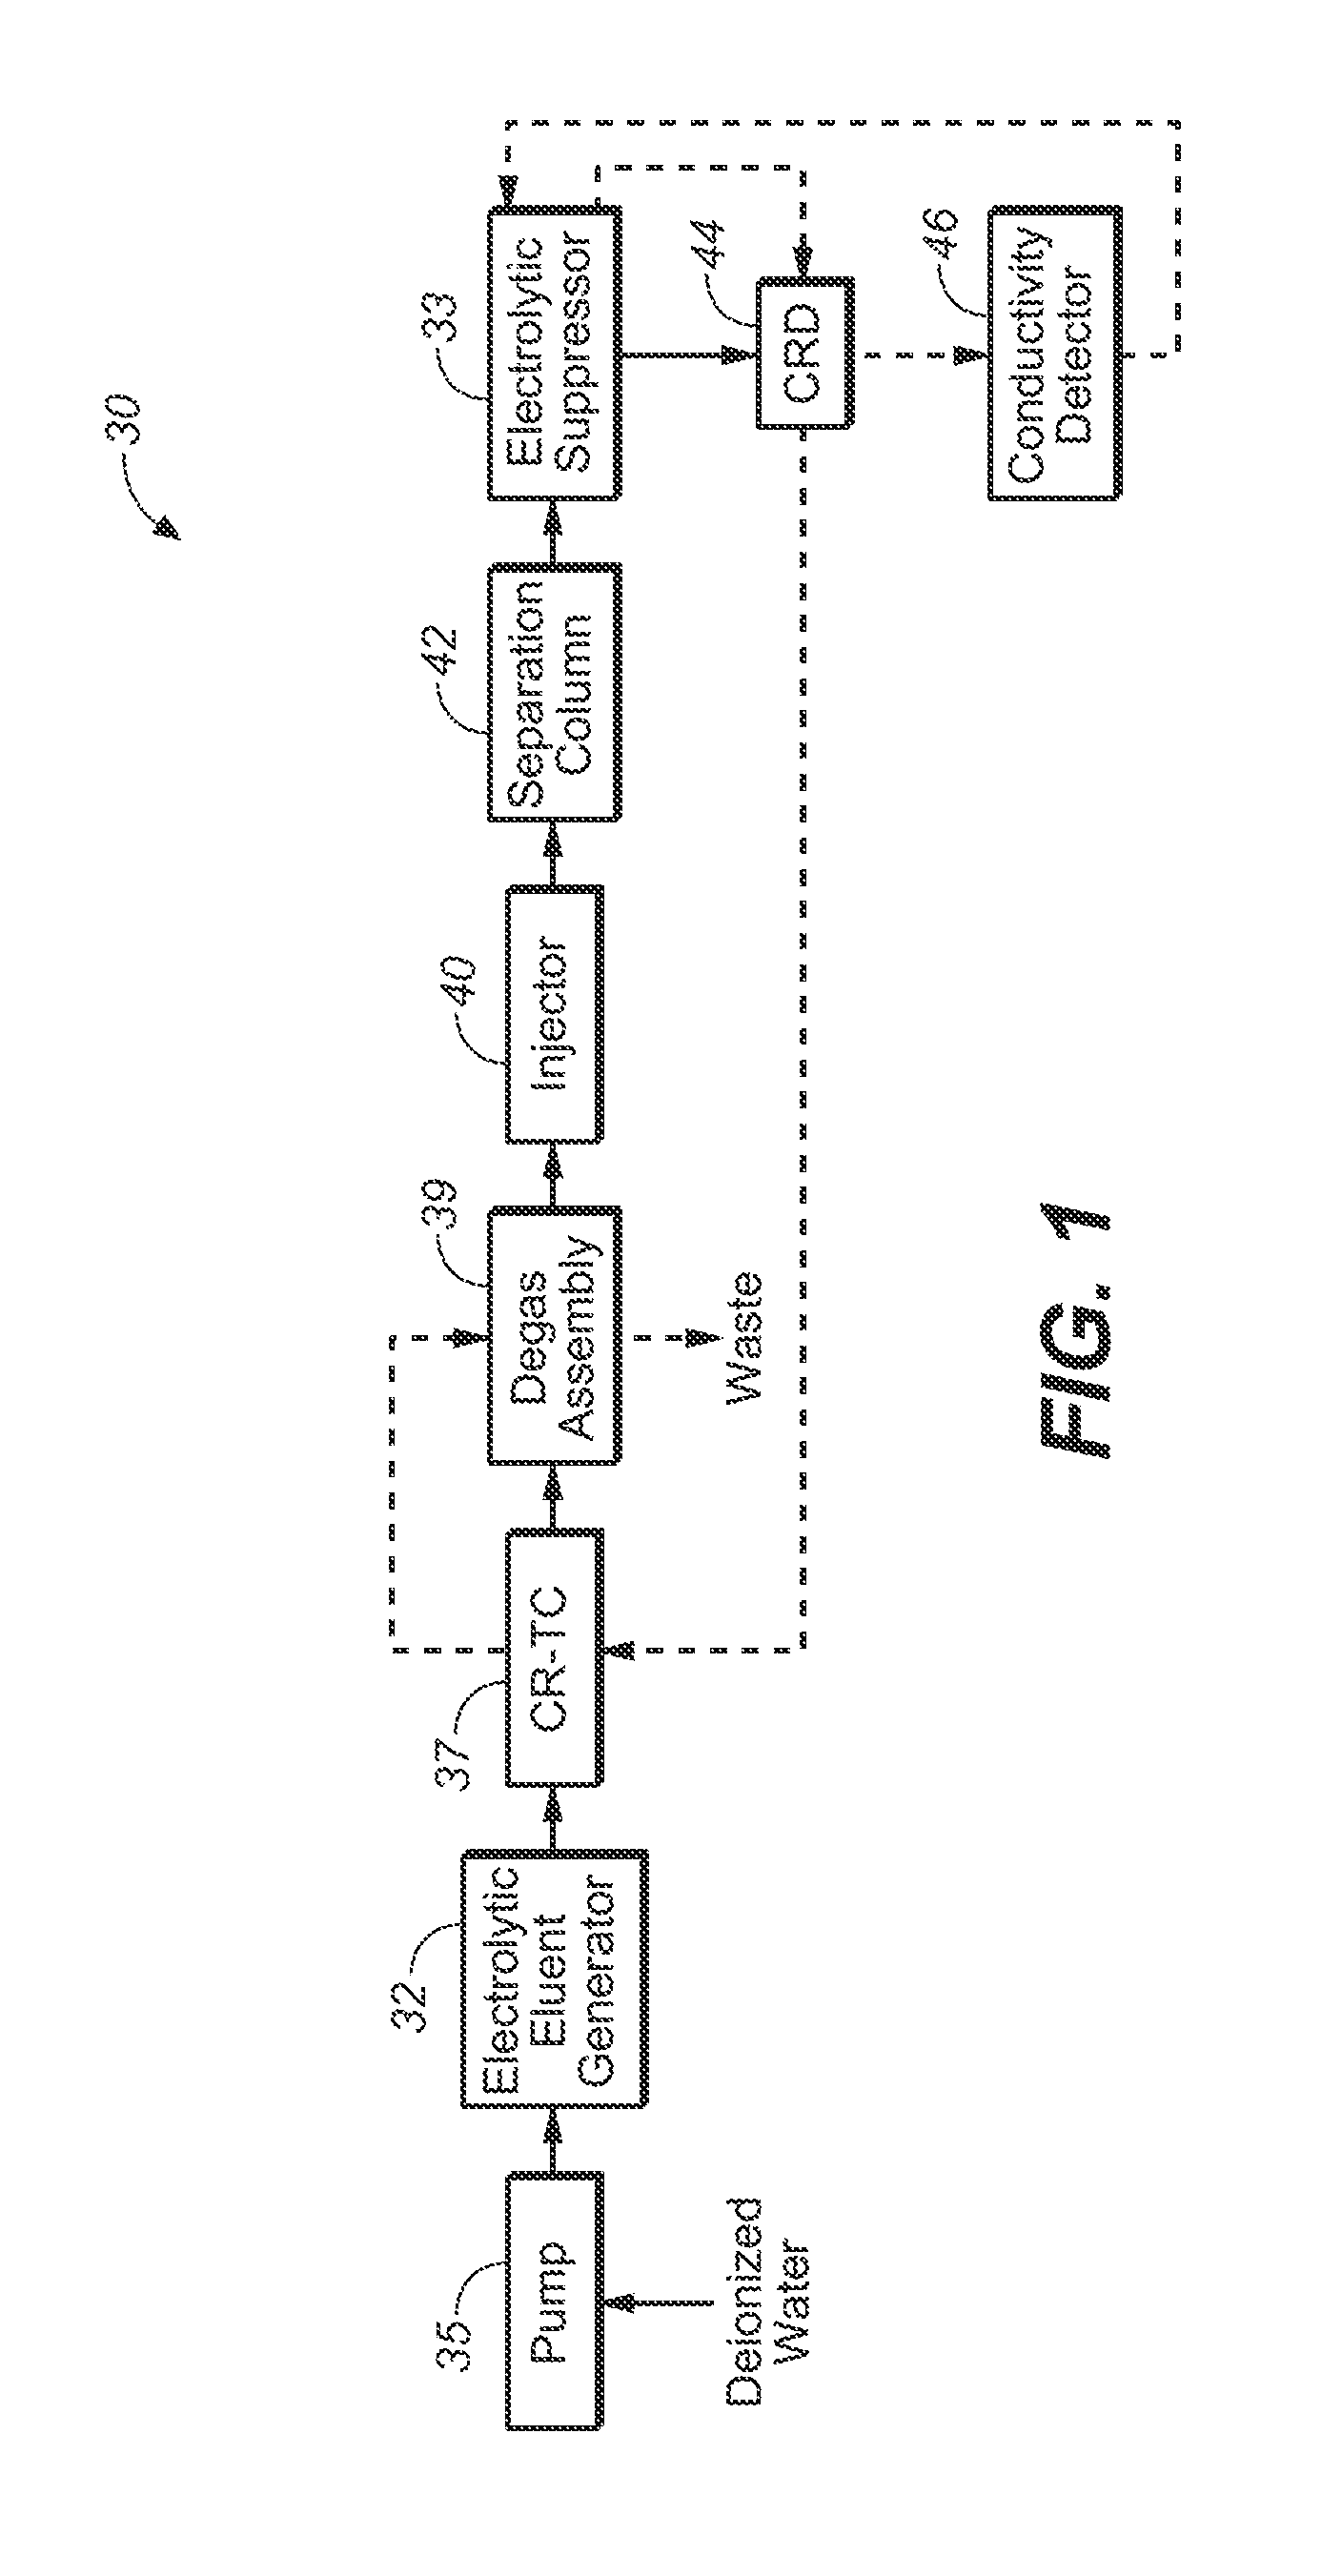 Multichannel ion chromatography system and method